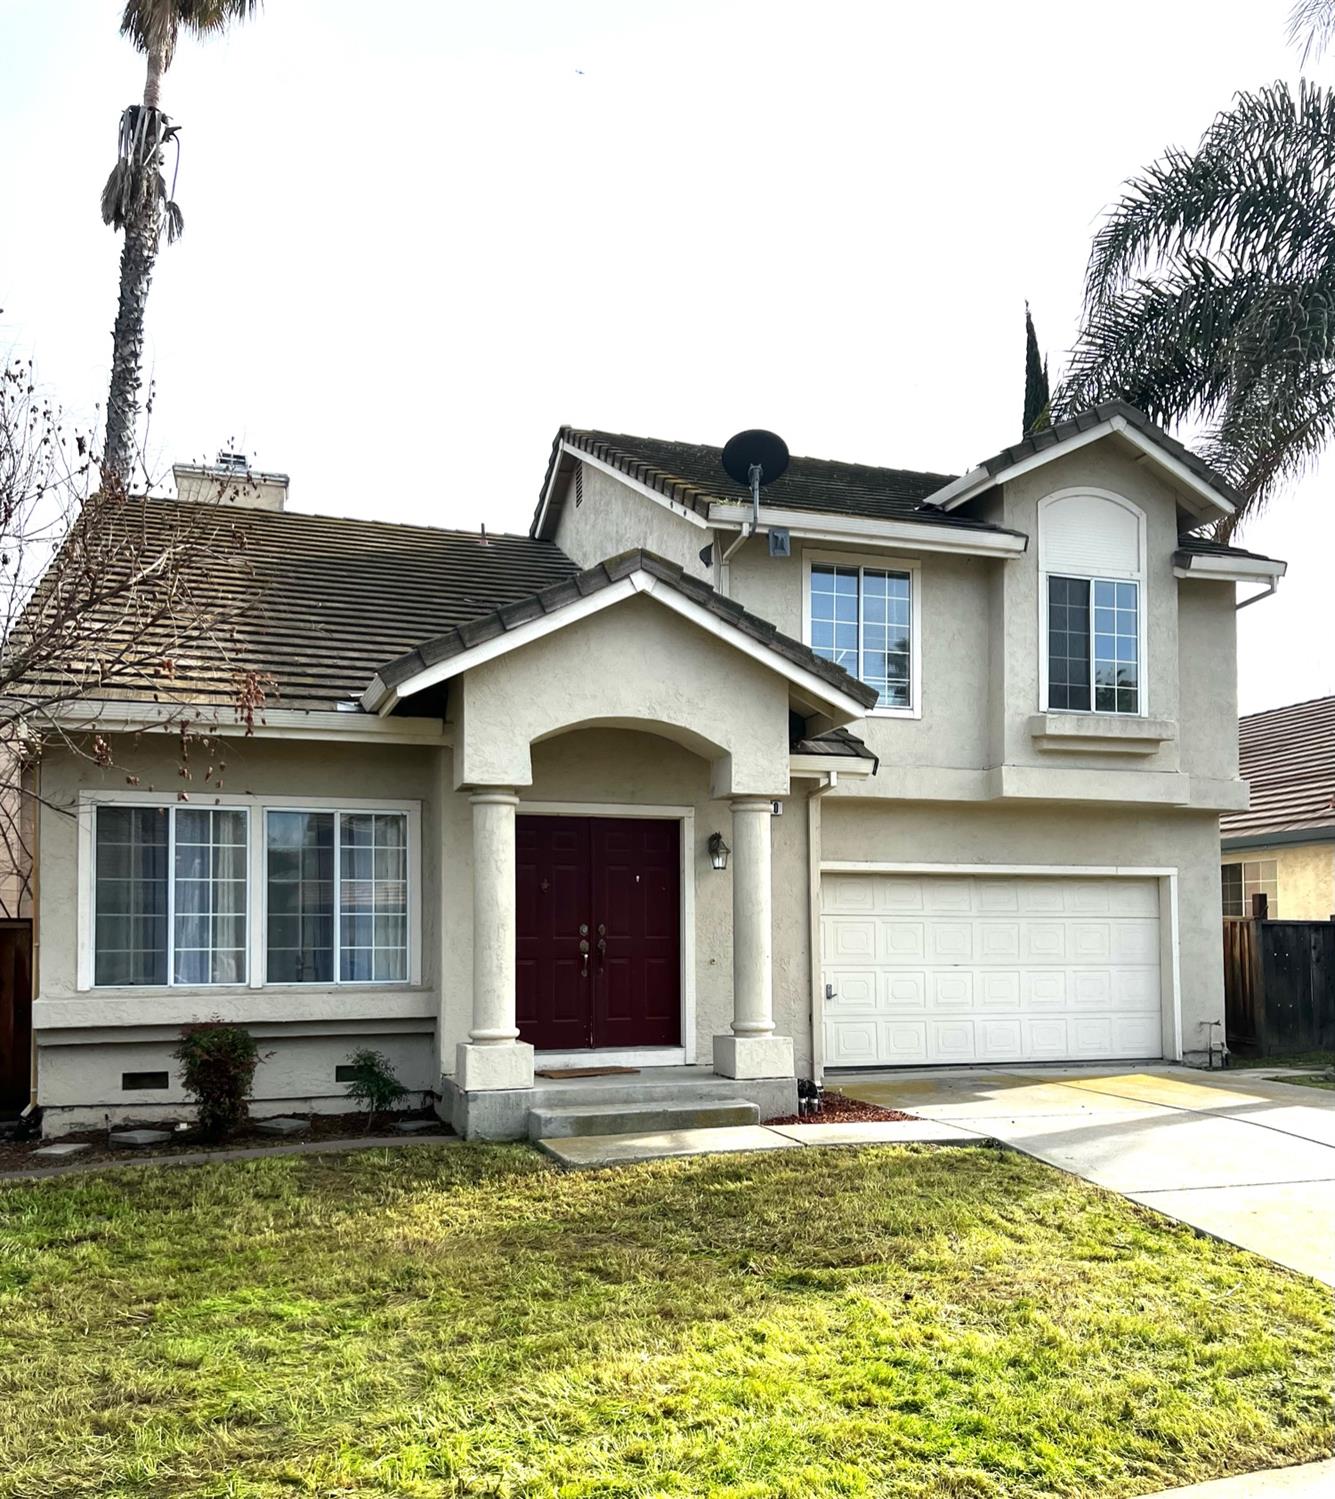 Photo of 470 Wagtail Dr in Tracy, CA